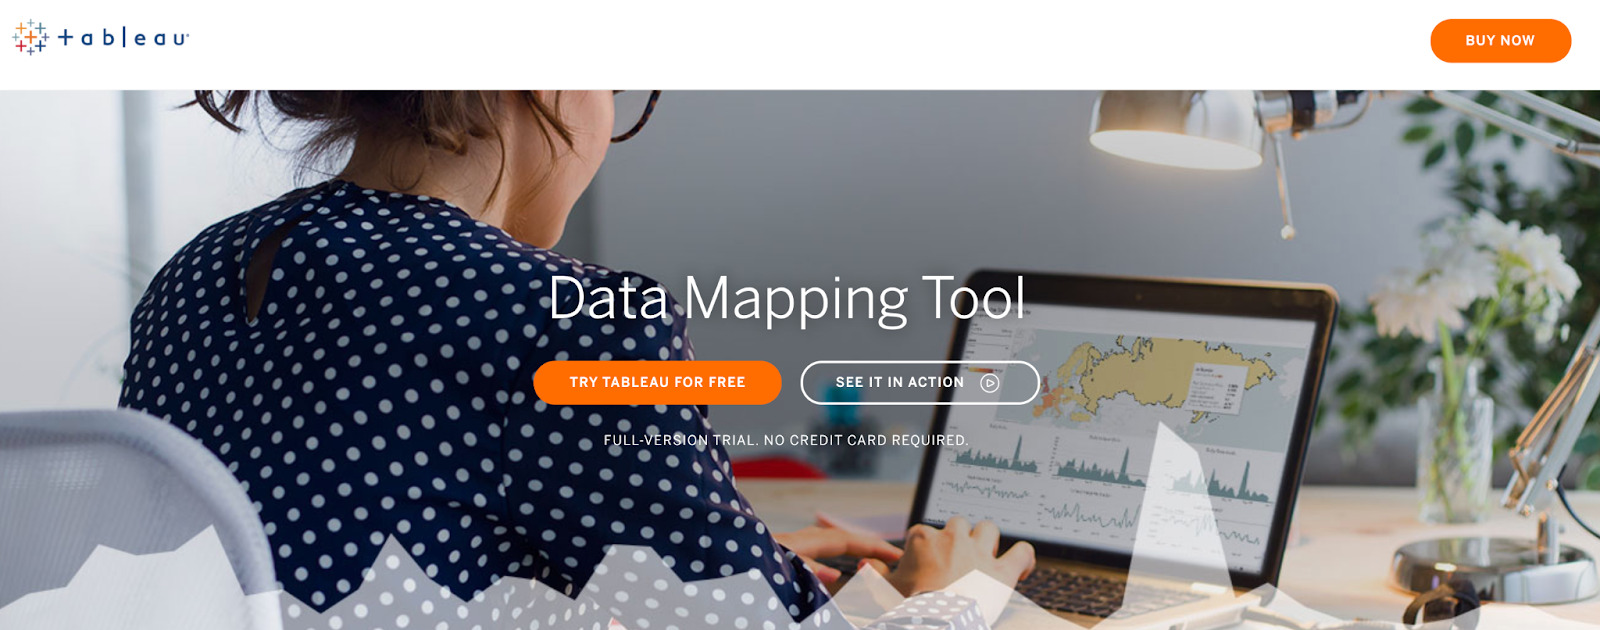 tableau data mapping tool example